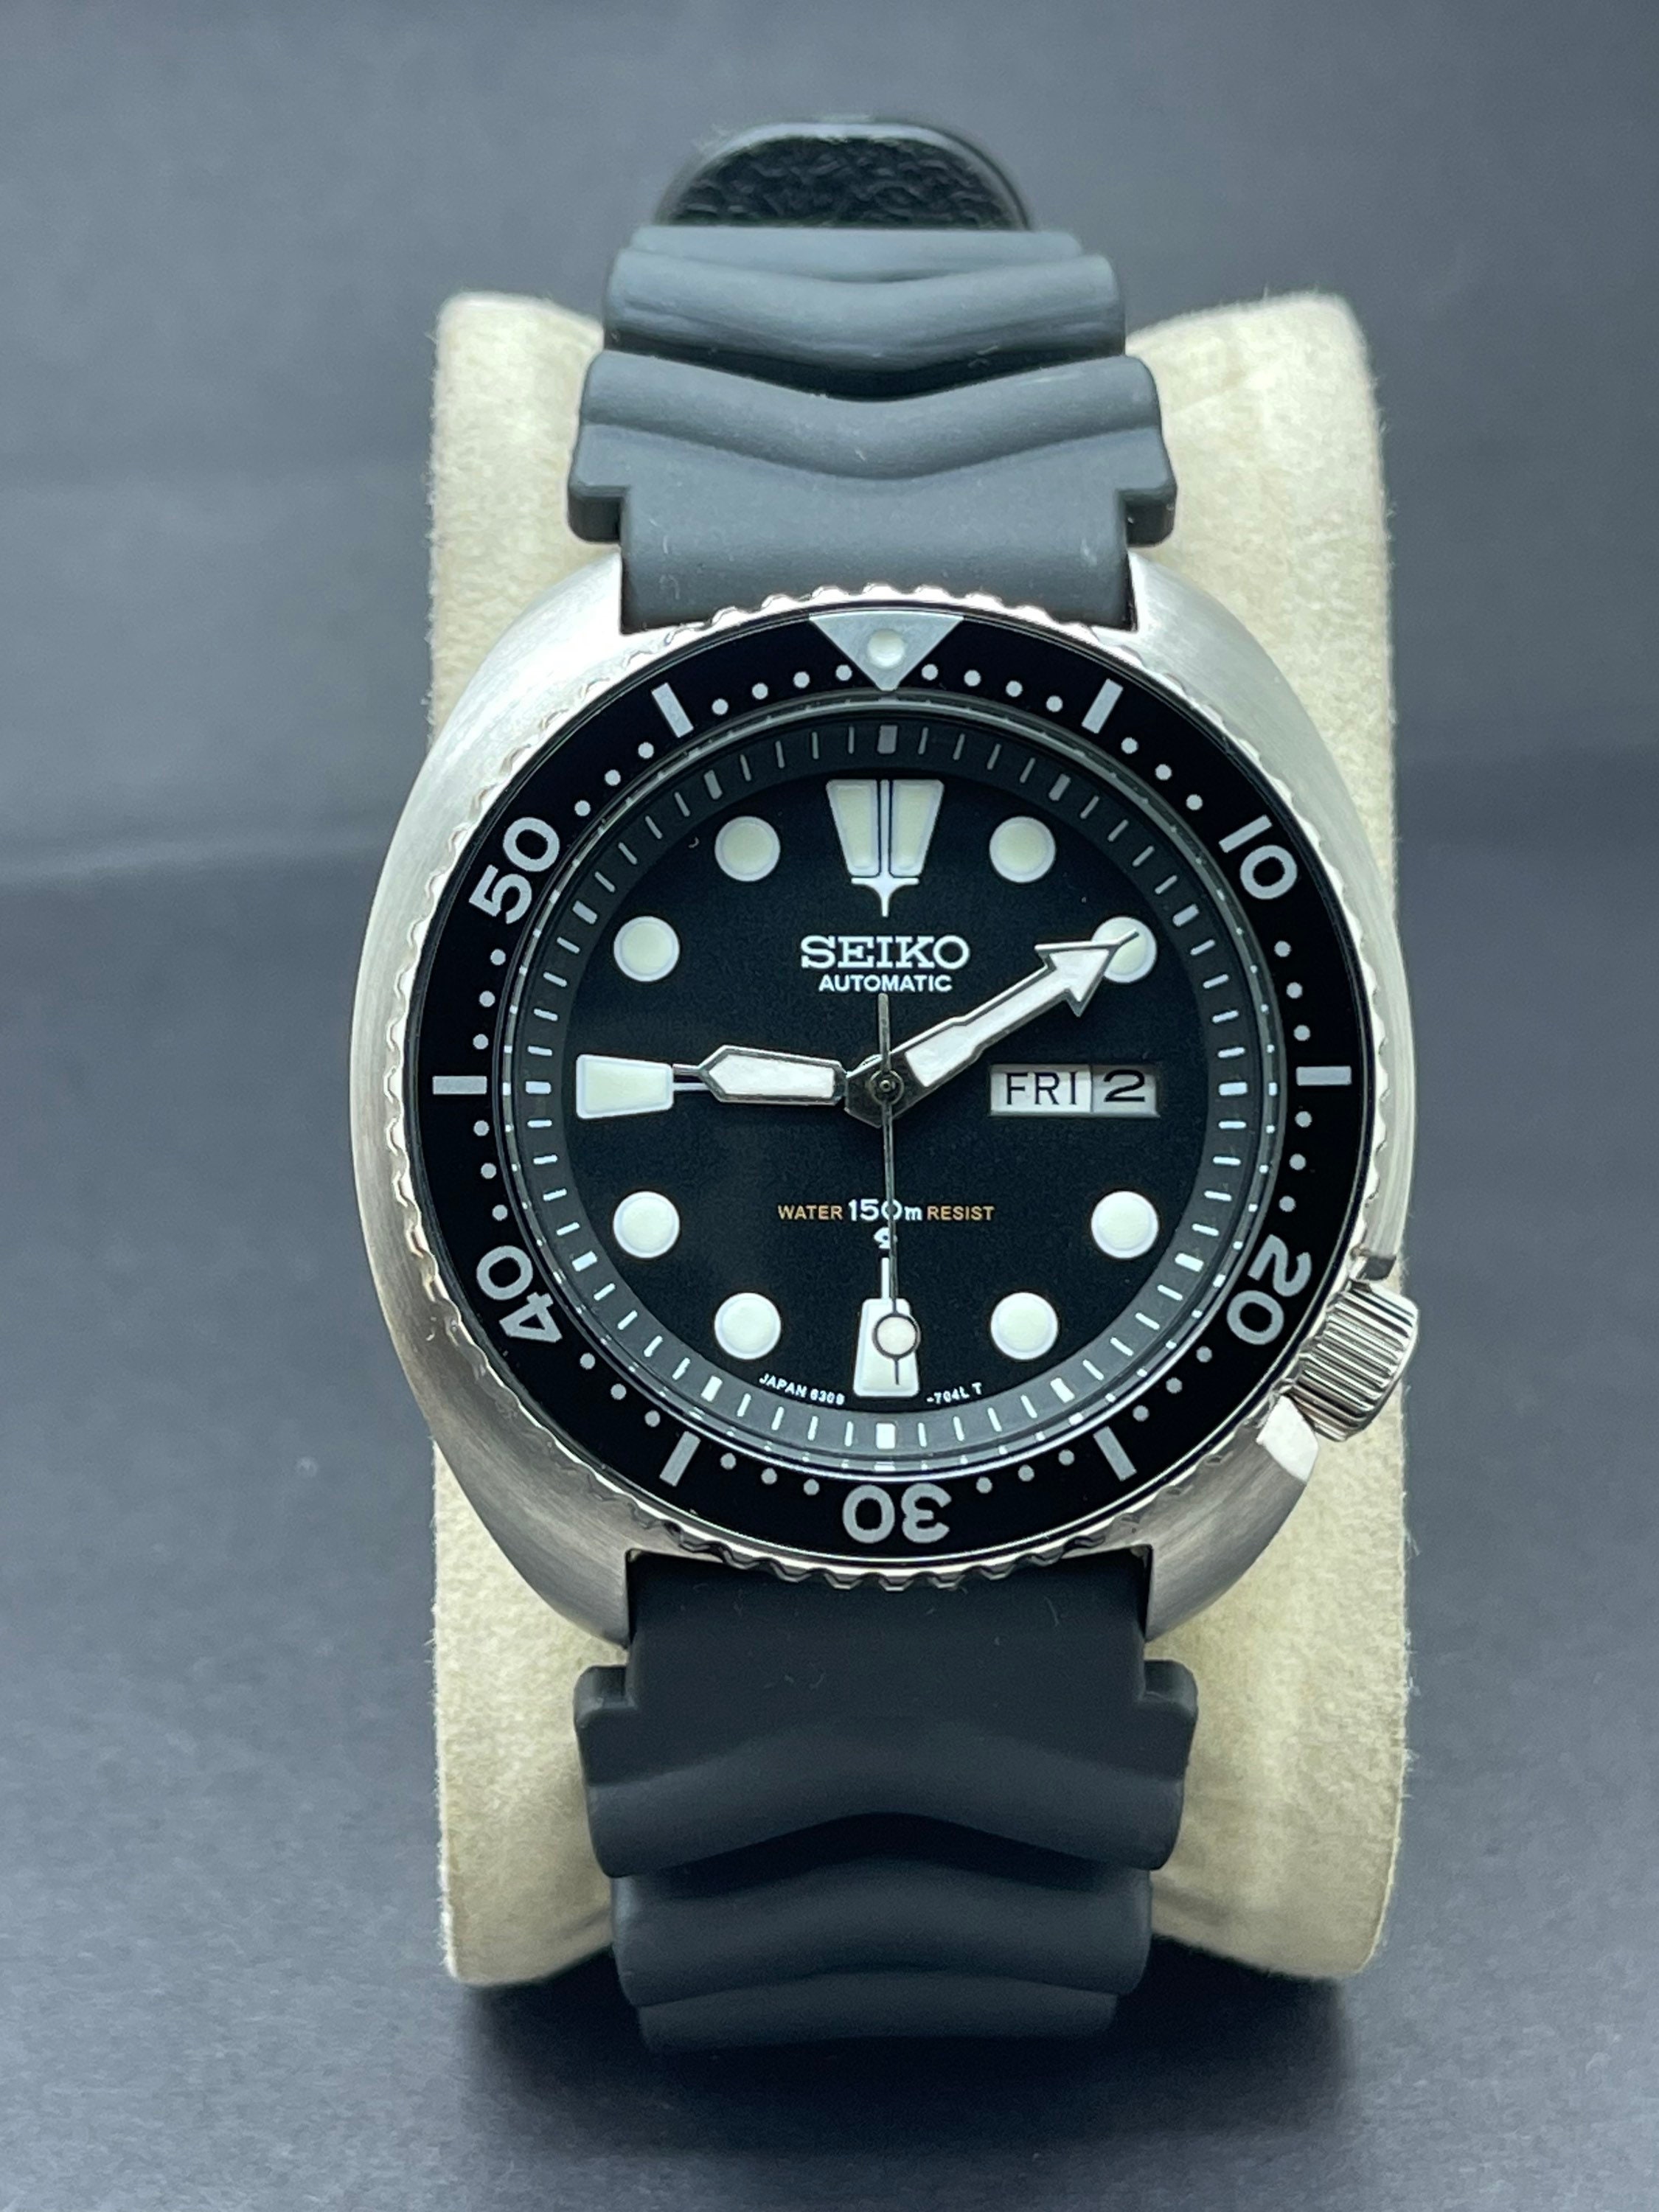 Beautiful Seiko Diver 150M Automatic Watch Made in Japan. - Etsy Canada